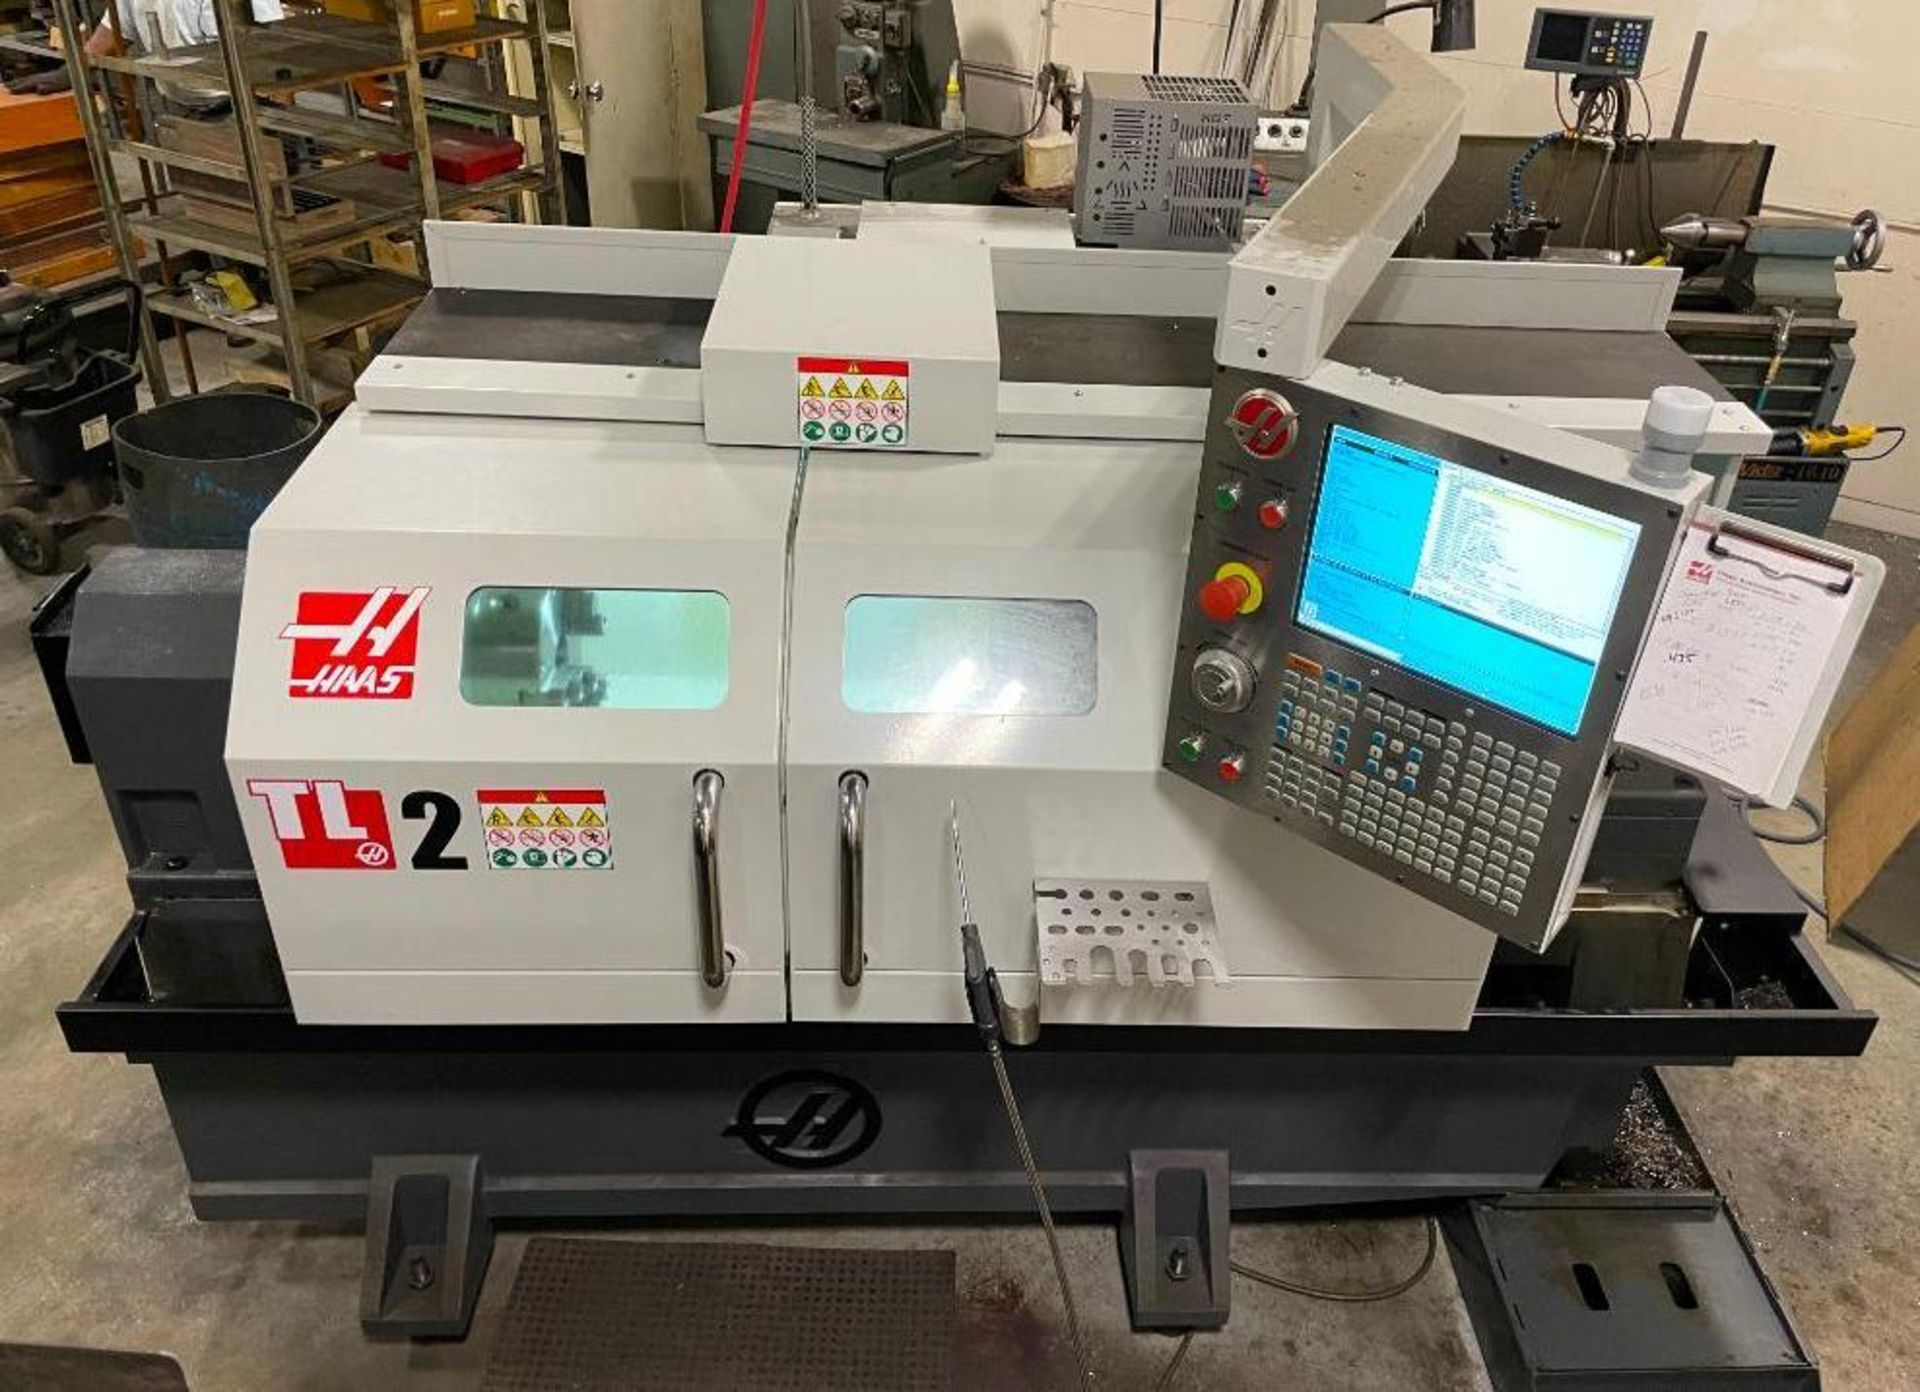 2016 HAAS TL-2 CNC LATHE INFORMATION: 220V, 3 PHASE, POWER ON HRS: 2980, CYCLE START HRS: 557, FEED